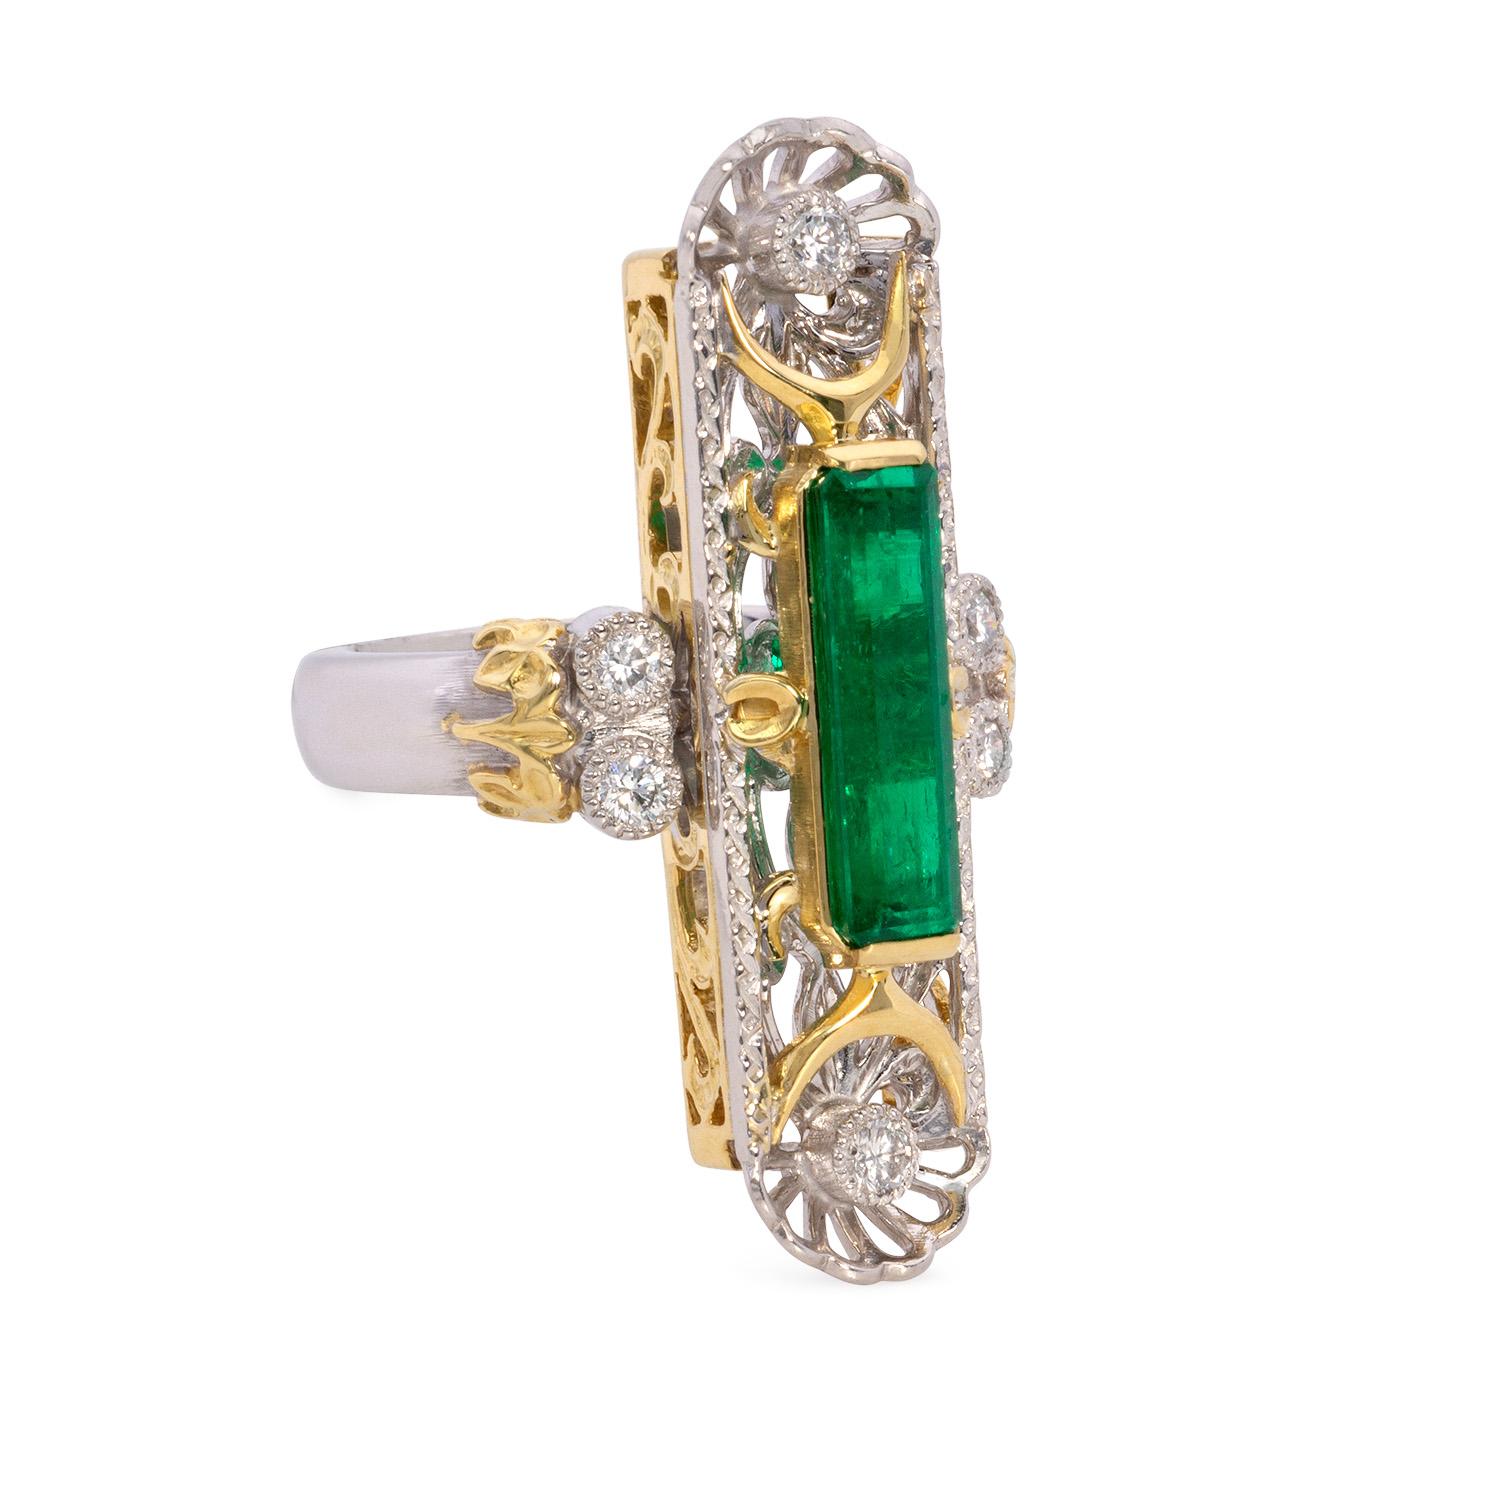 Introducing a one of a kind design with a breathtaking Emerald centerpiece! This remarkable ring was created with this rare, high-quality, very-fine Colombian Emerald in mind. The vintage platinum mount guarantees durability, while the yellow gold